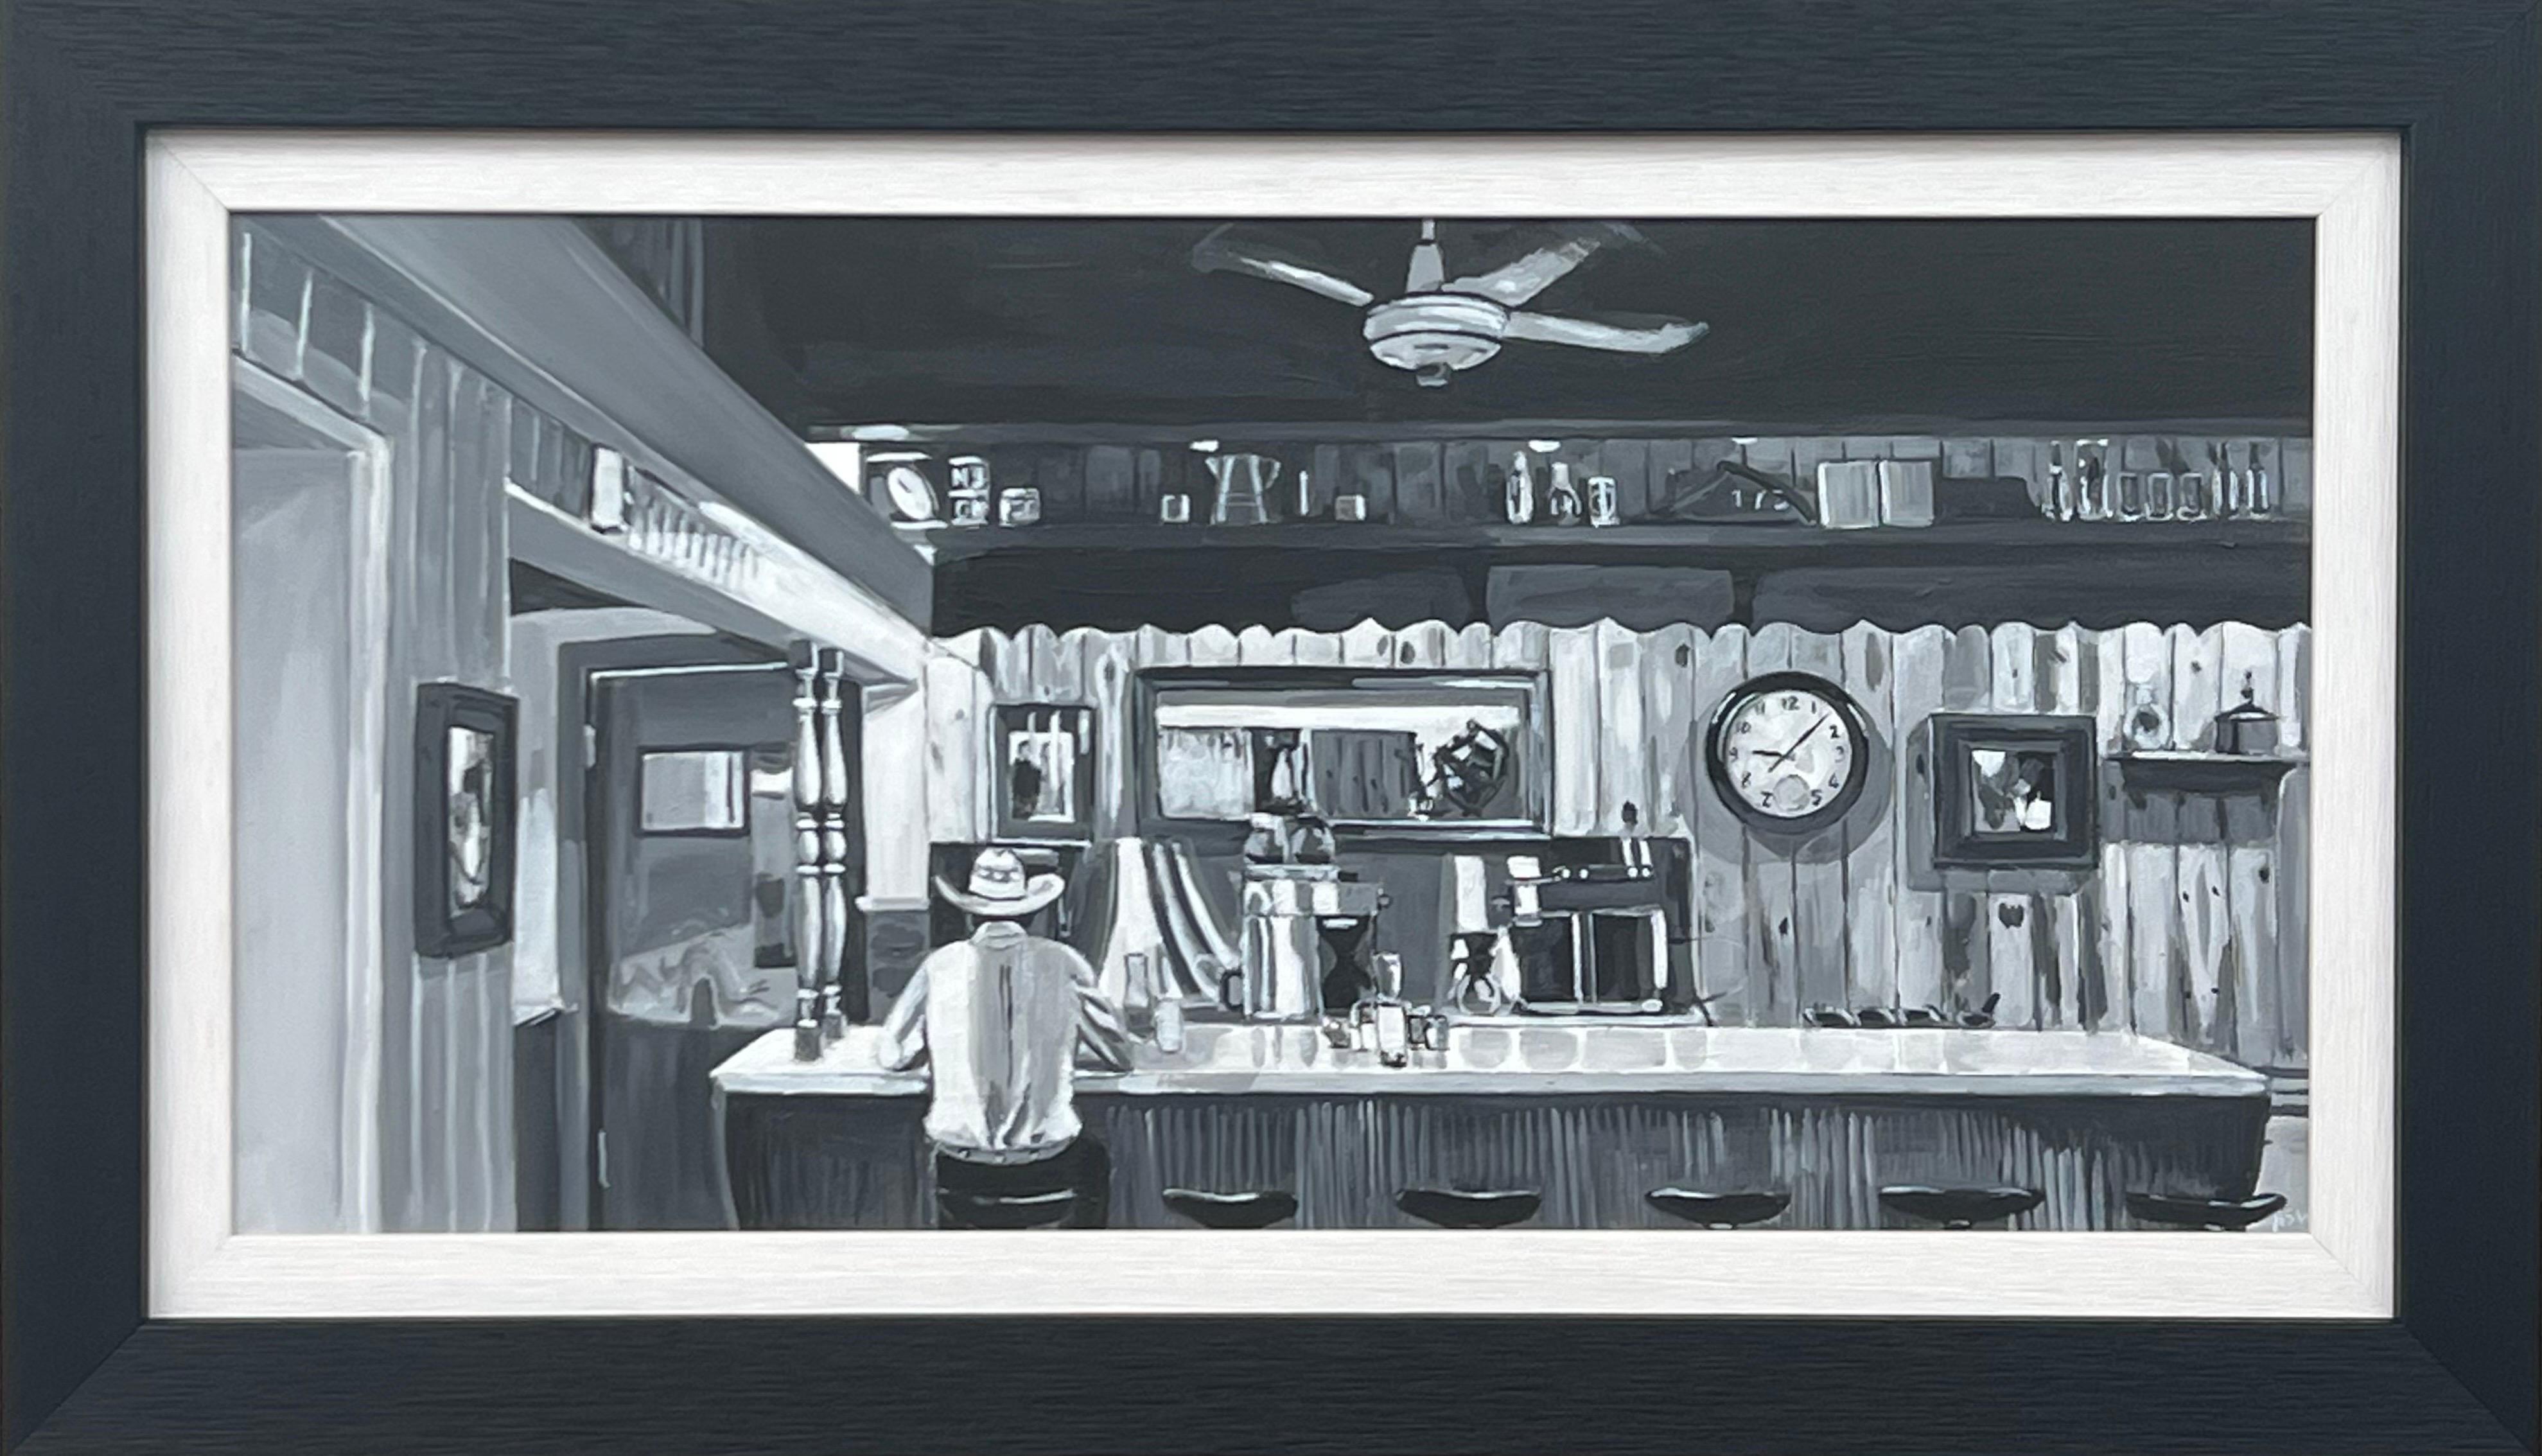 Angela Wakefield Figurative Painting - American Cowboy Diner Painting by British Contemporary Artist in Black & White